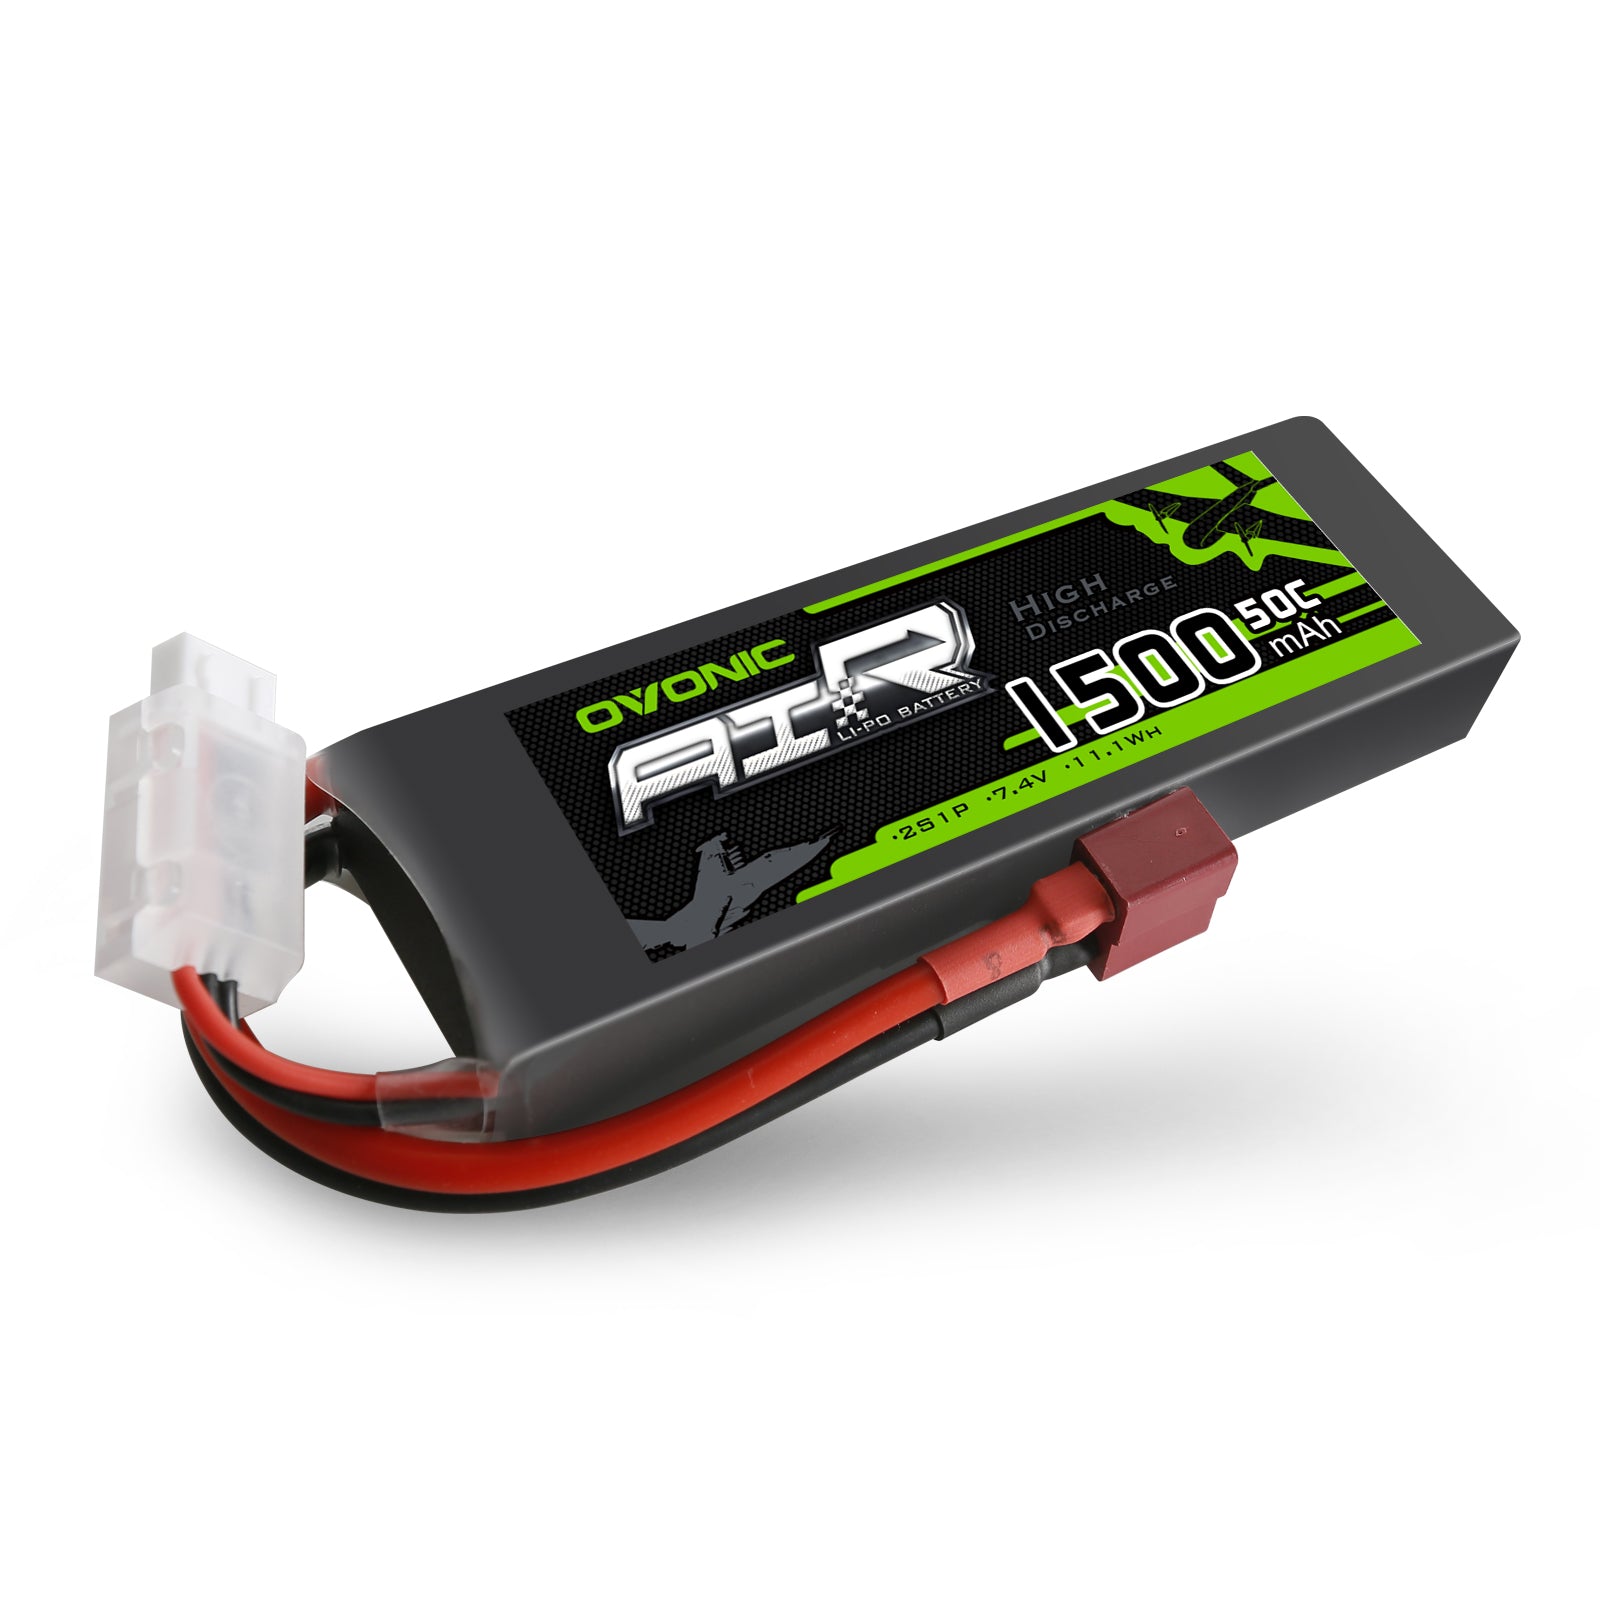 OVONIC 7.4V 50C 2S 1500mAh LiPo Battery Deans for Foamy Airplane 1